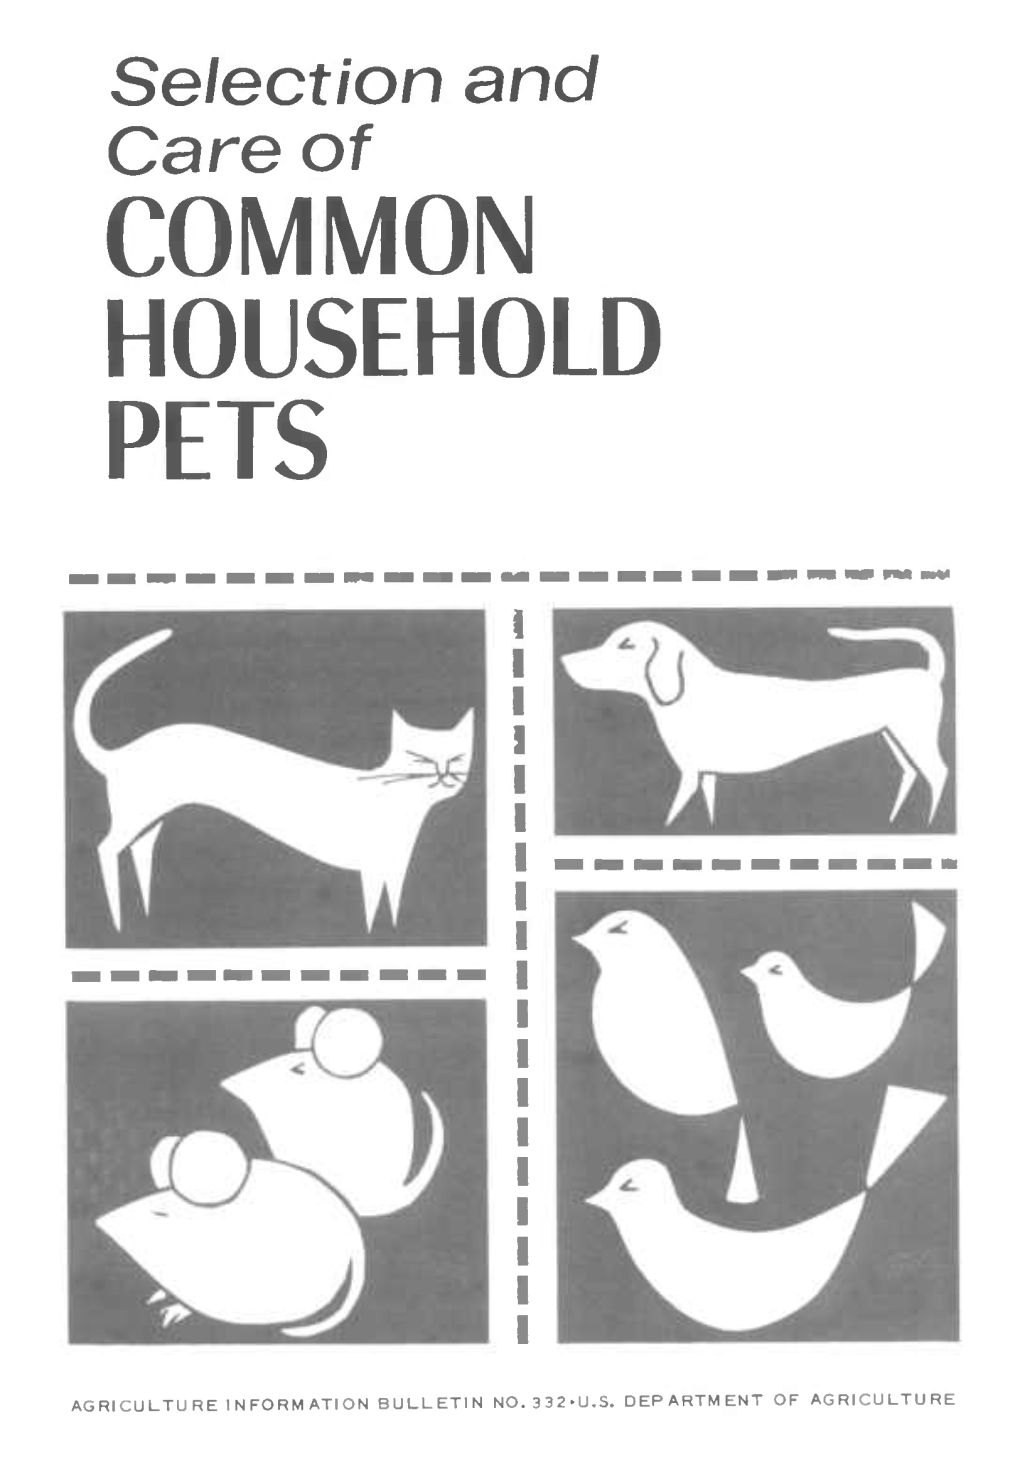 Common Household Pets